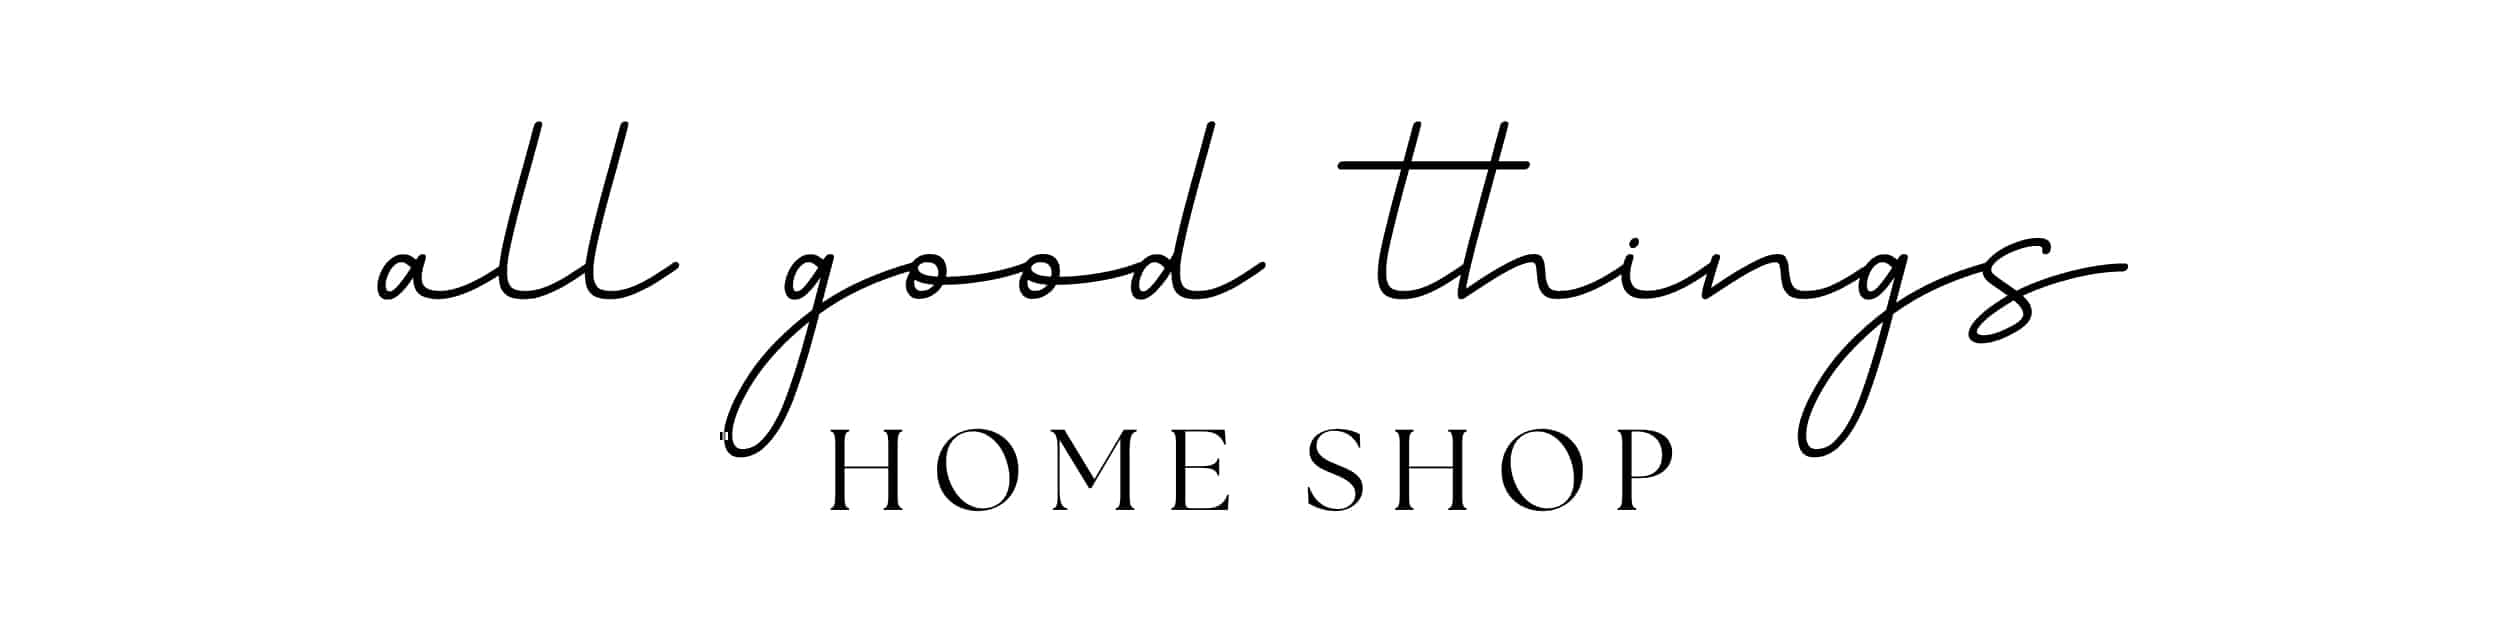 Art and Walls: All Good Things Home Shop